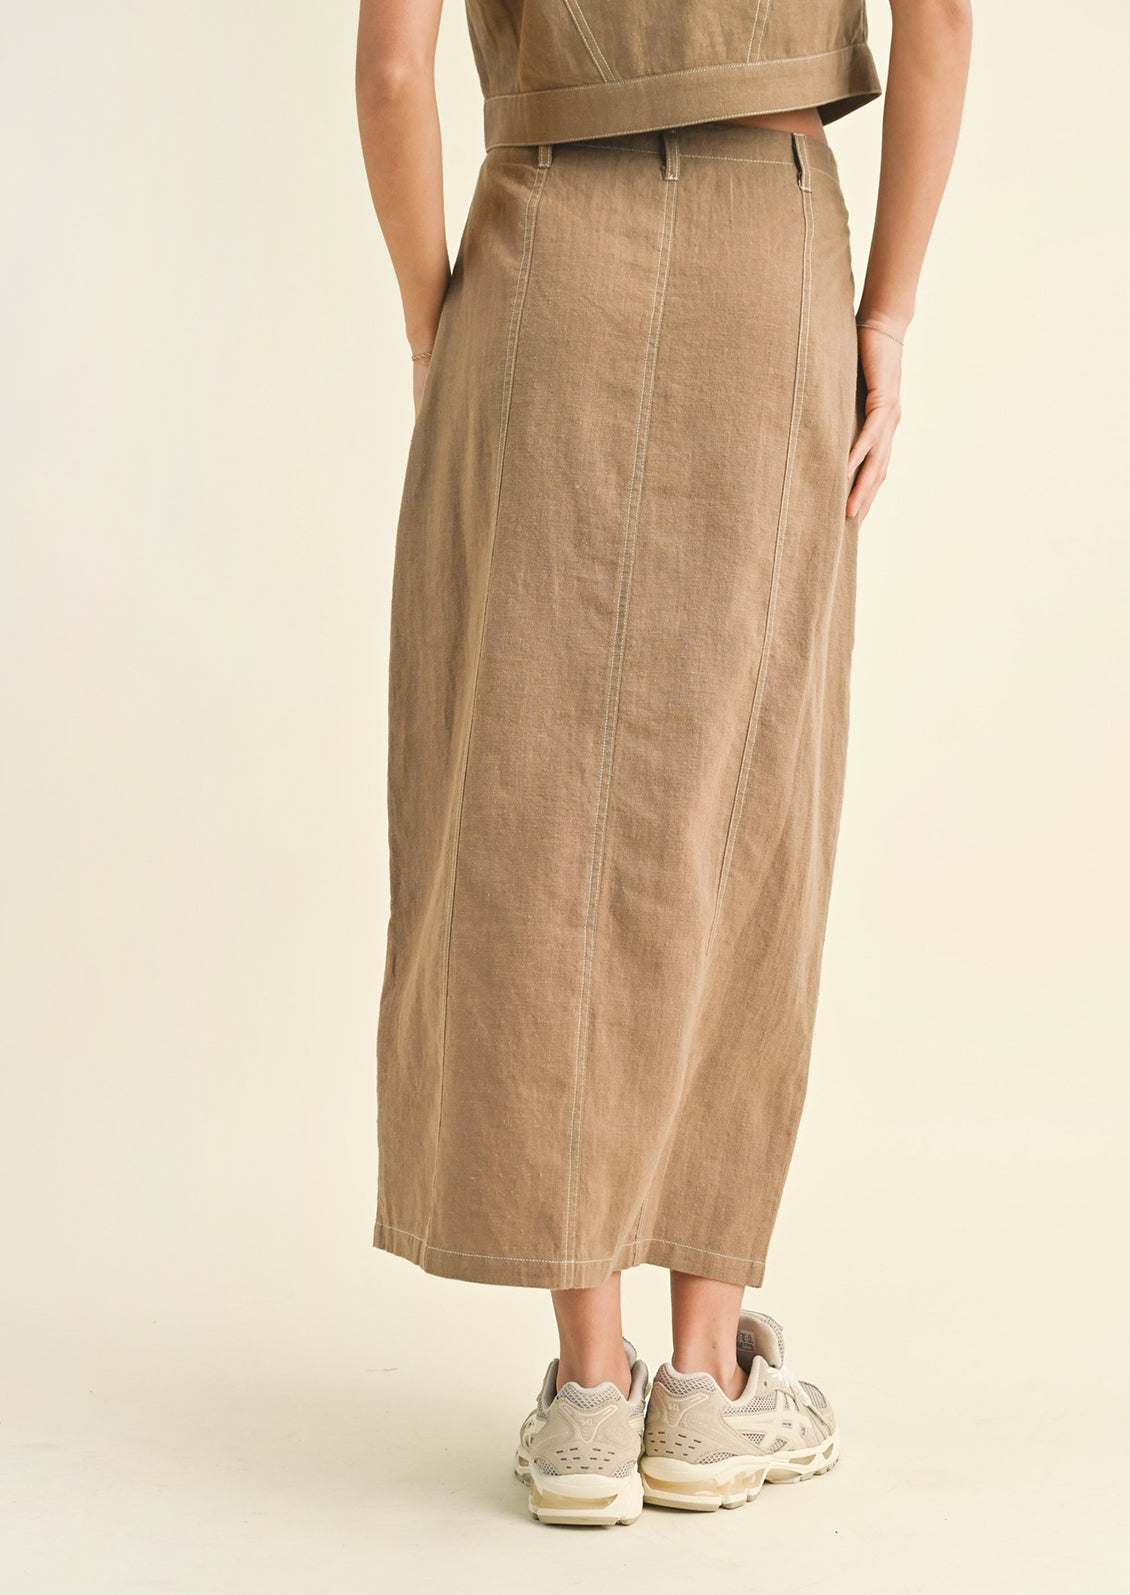 Woman wearing tan cotton midi skirt, seen from behind. 